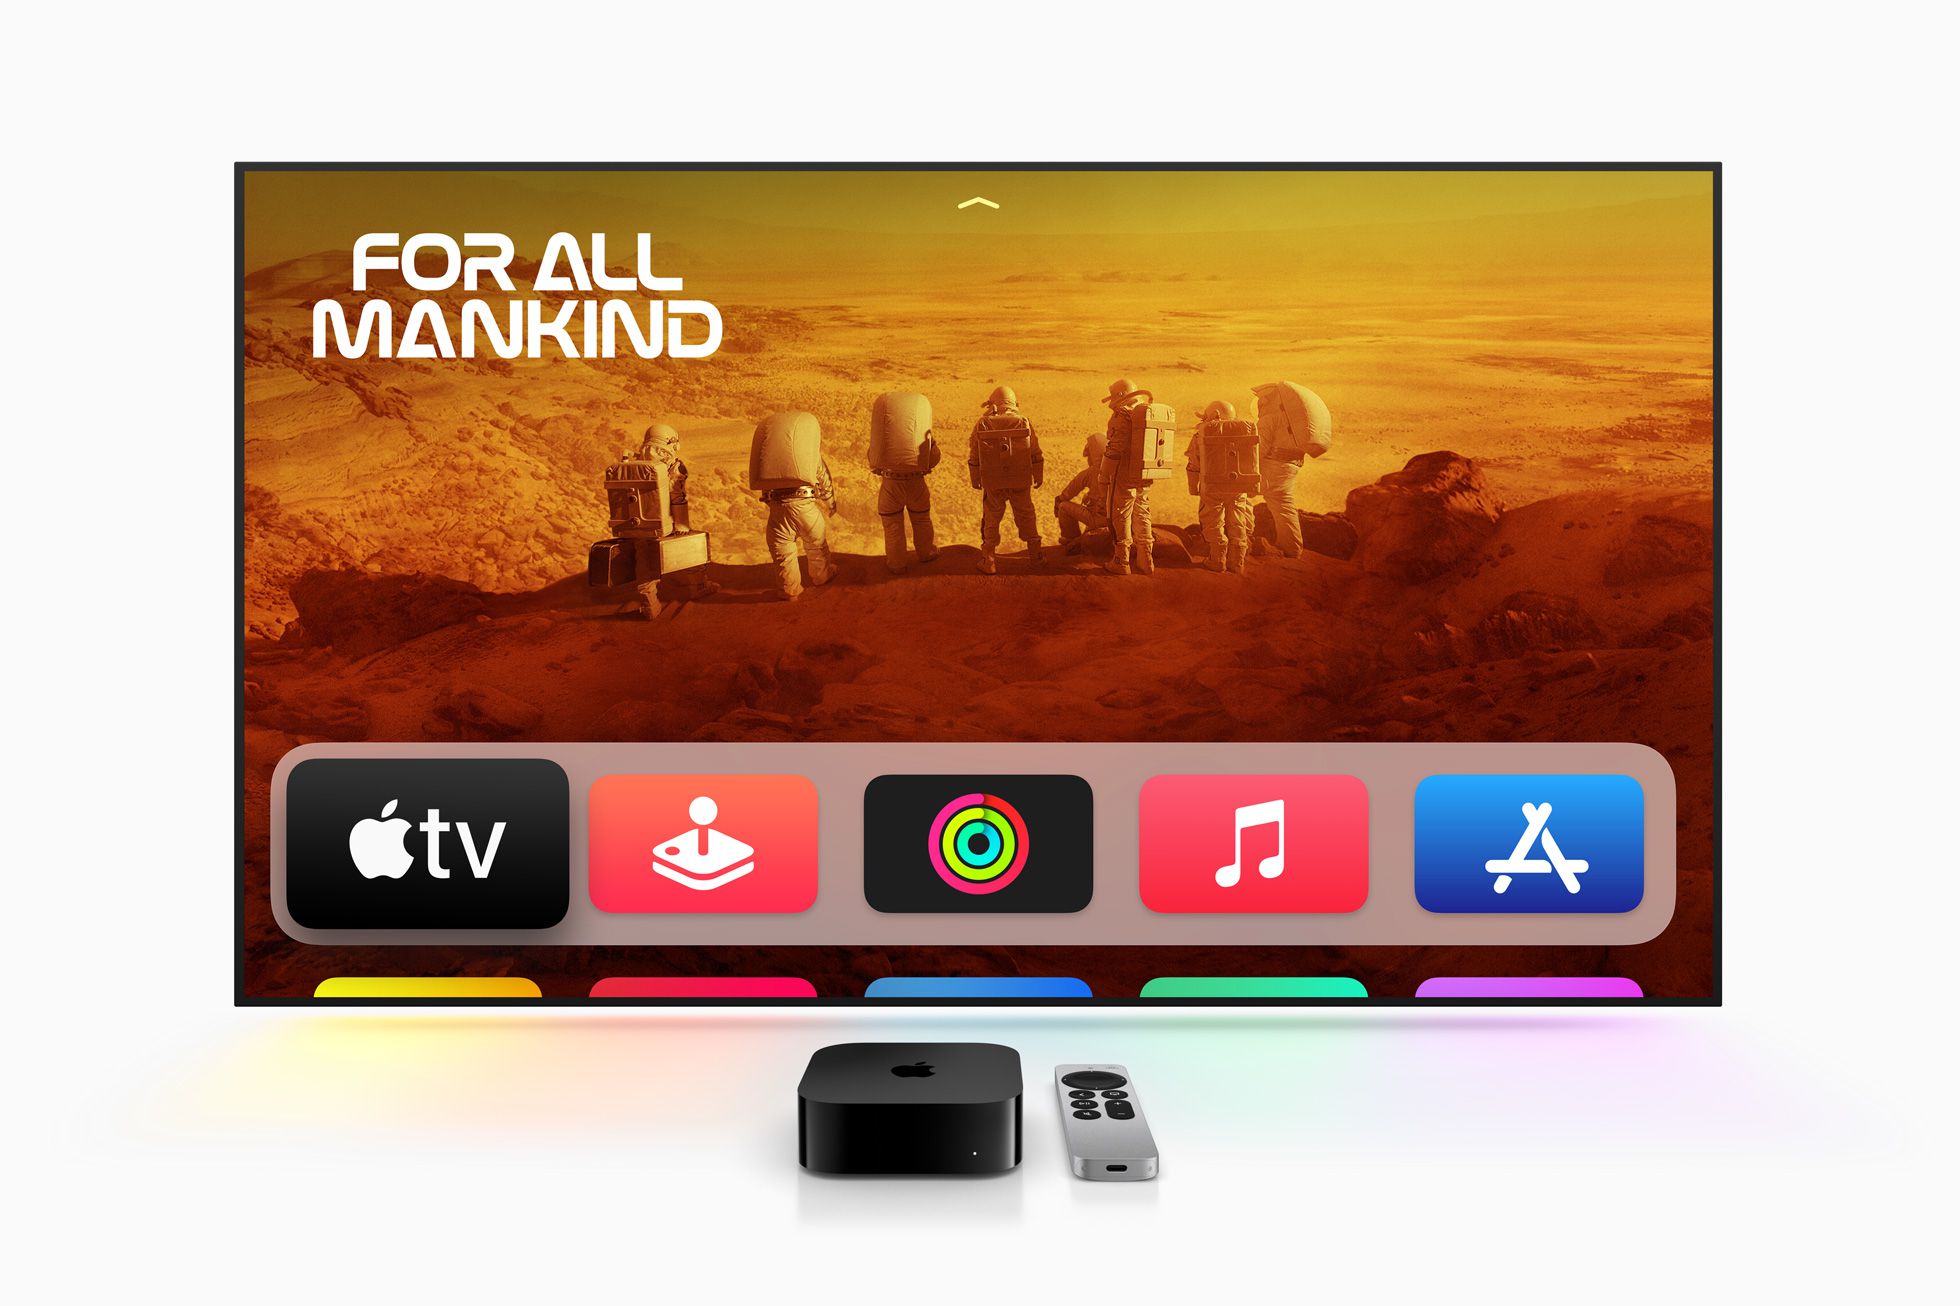 Apple Announces New Apple TV 4K With A15 Bionic Chip and HDR10+ for $129 – MacRumors